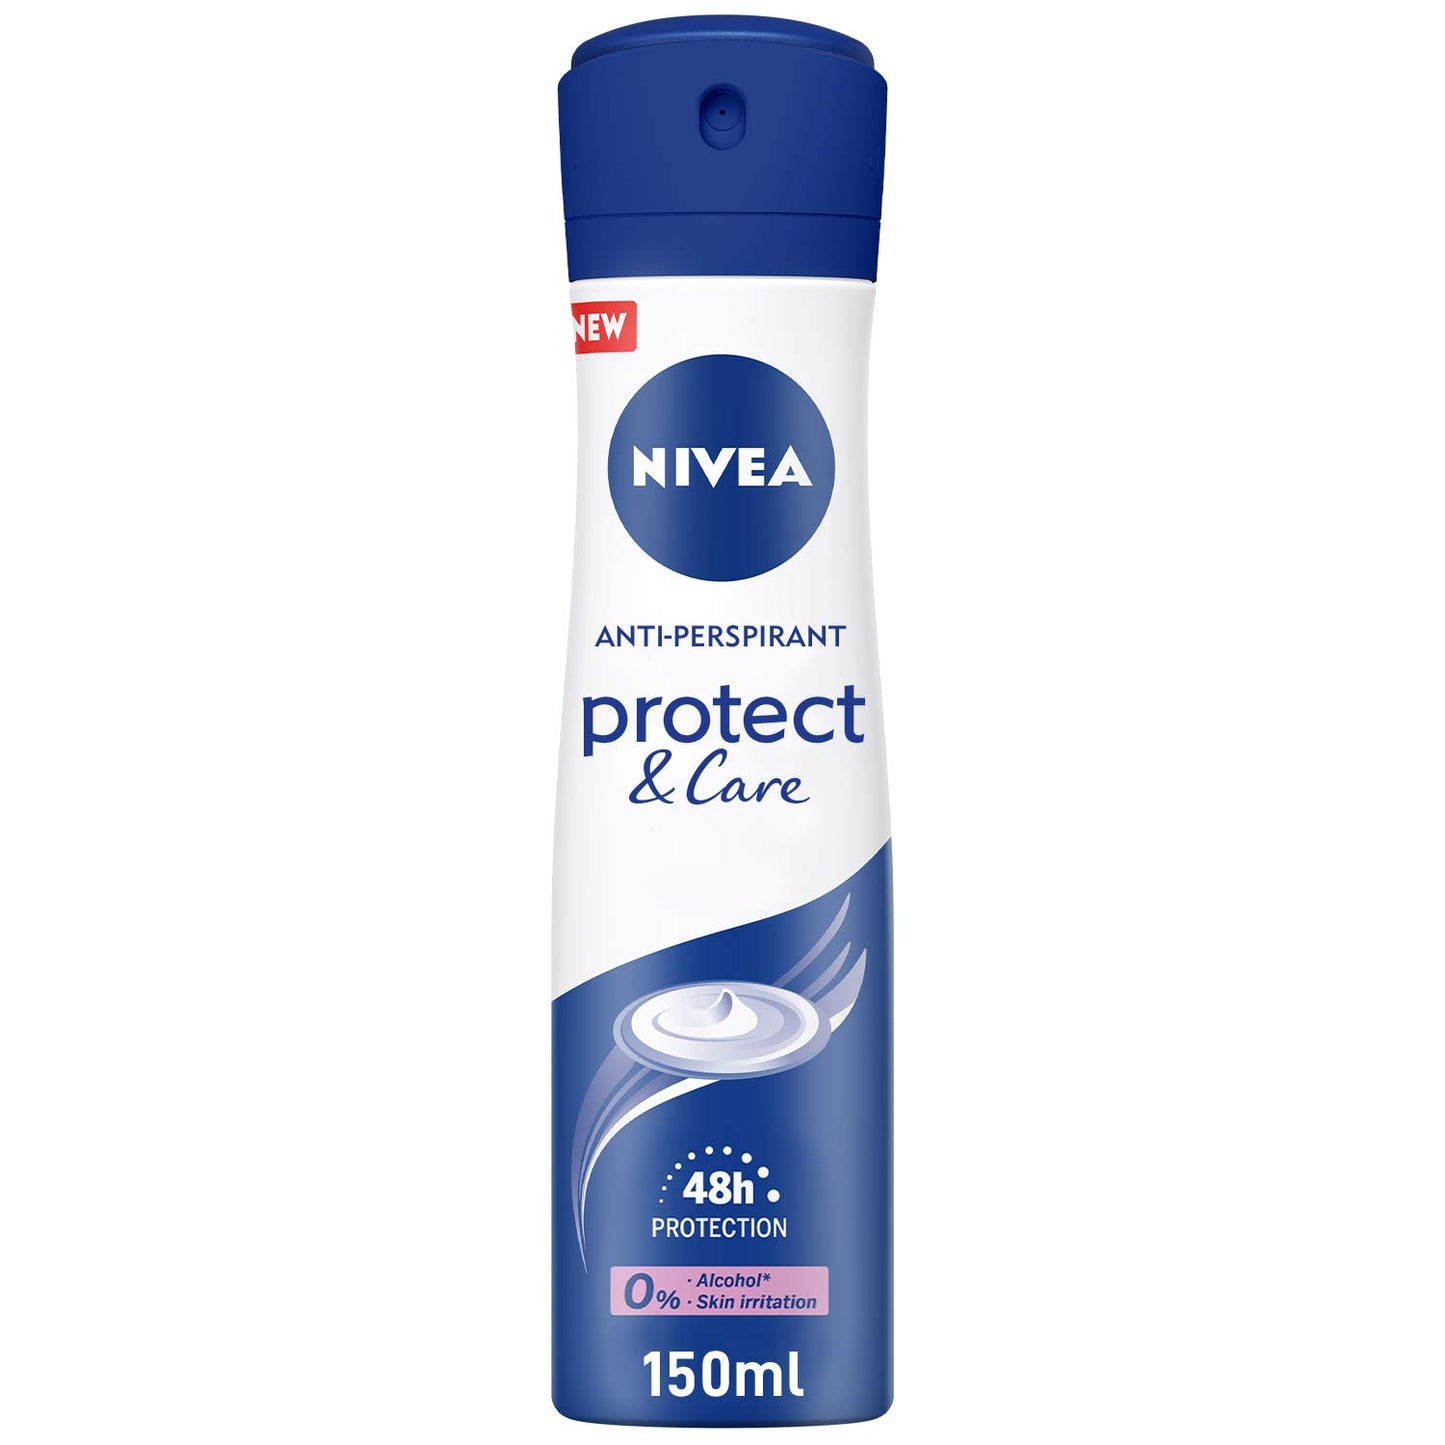 NIVEA Protect & Care quick dry deo spray 48H protection